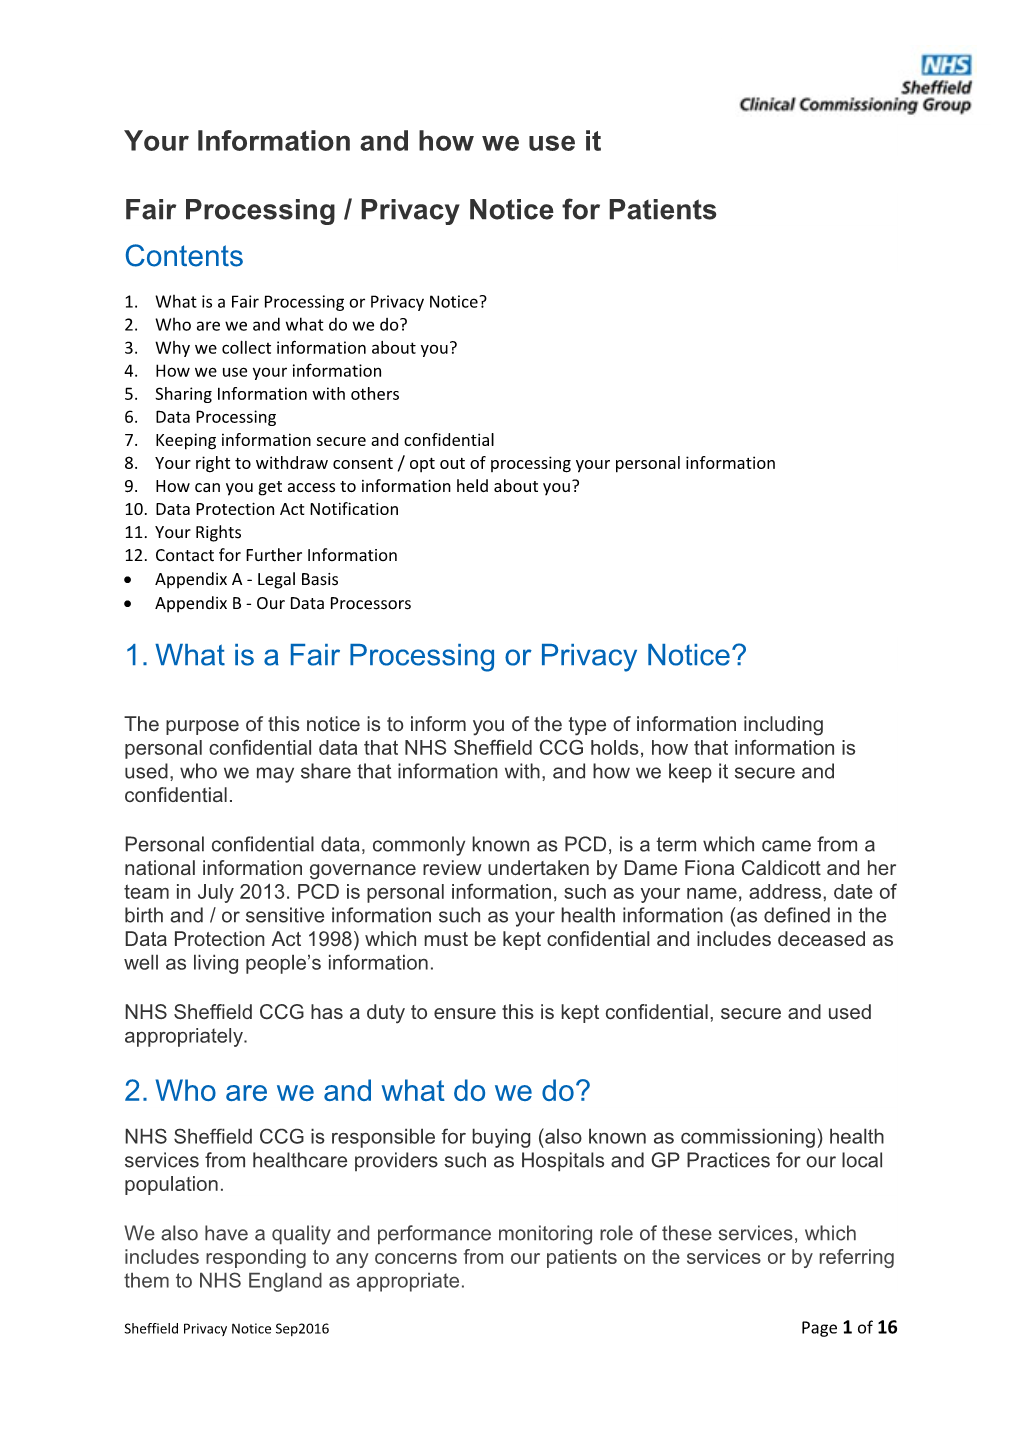 Fair Processing / Privacy Notice for Patients